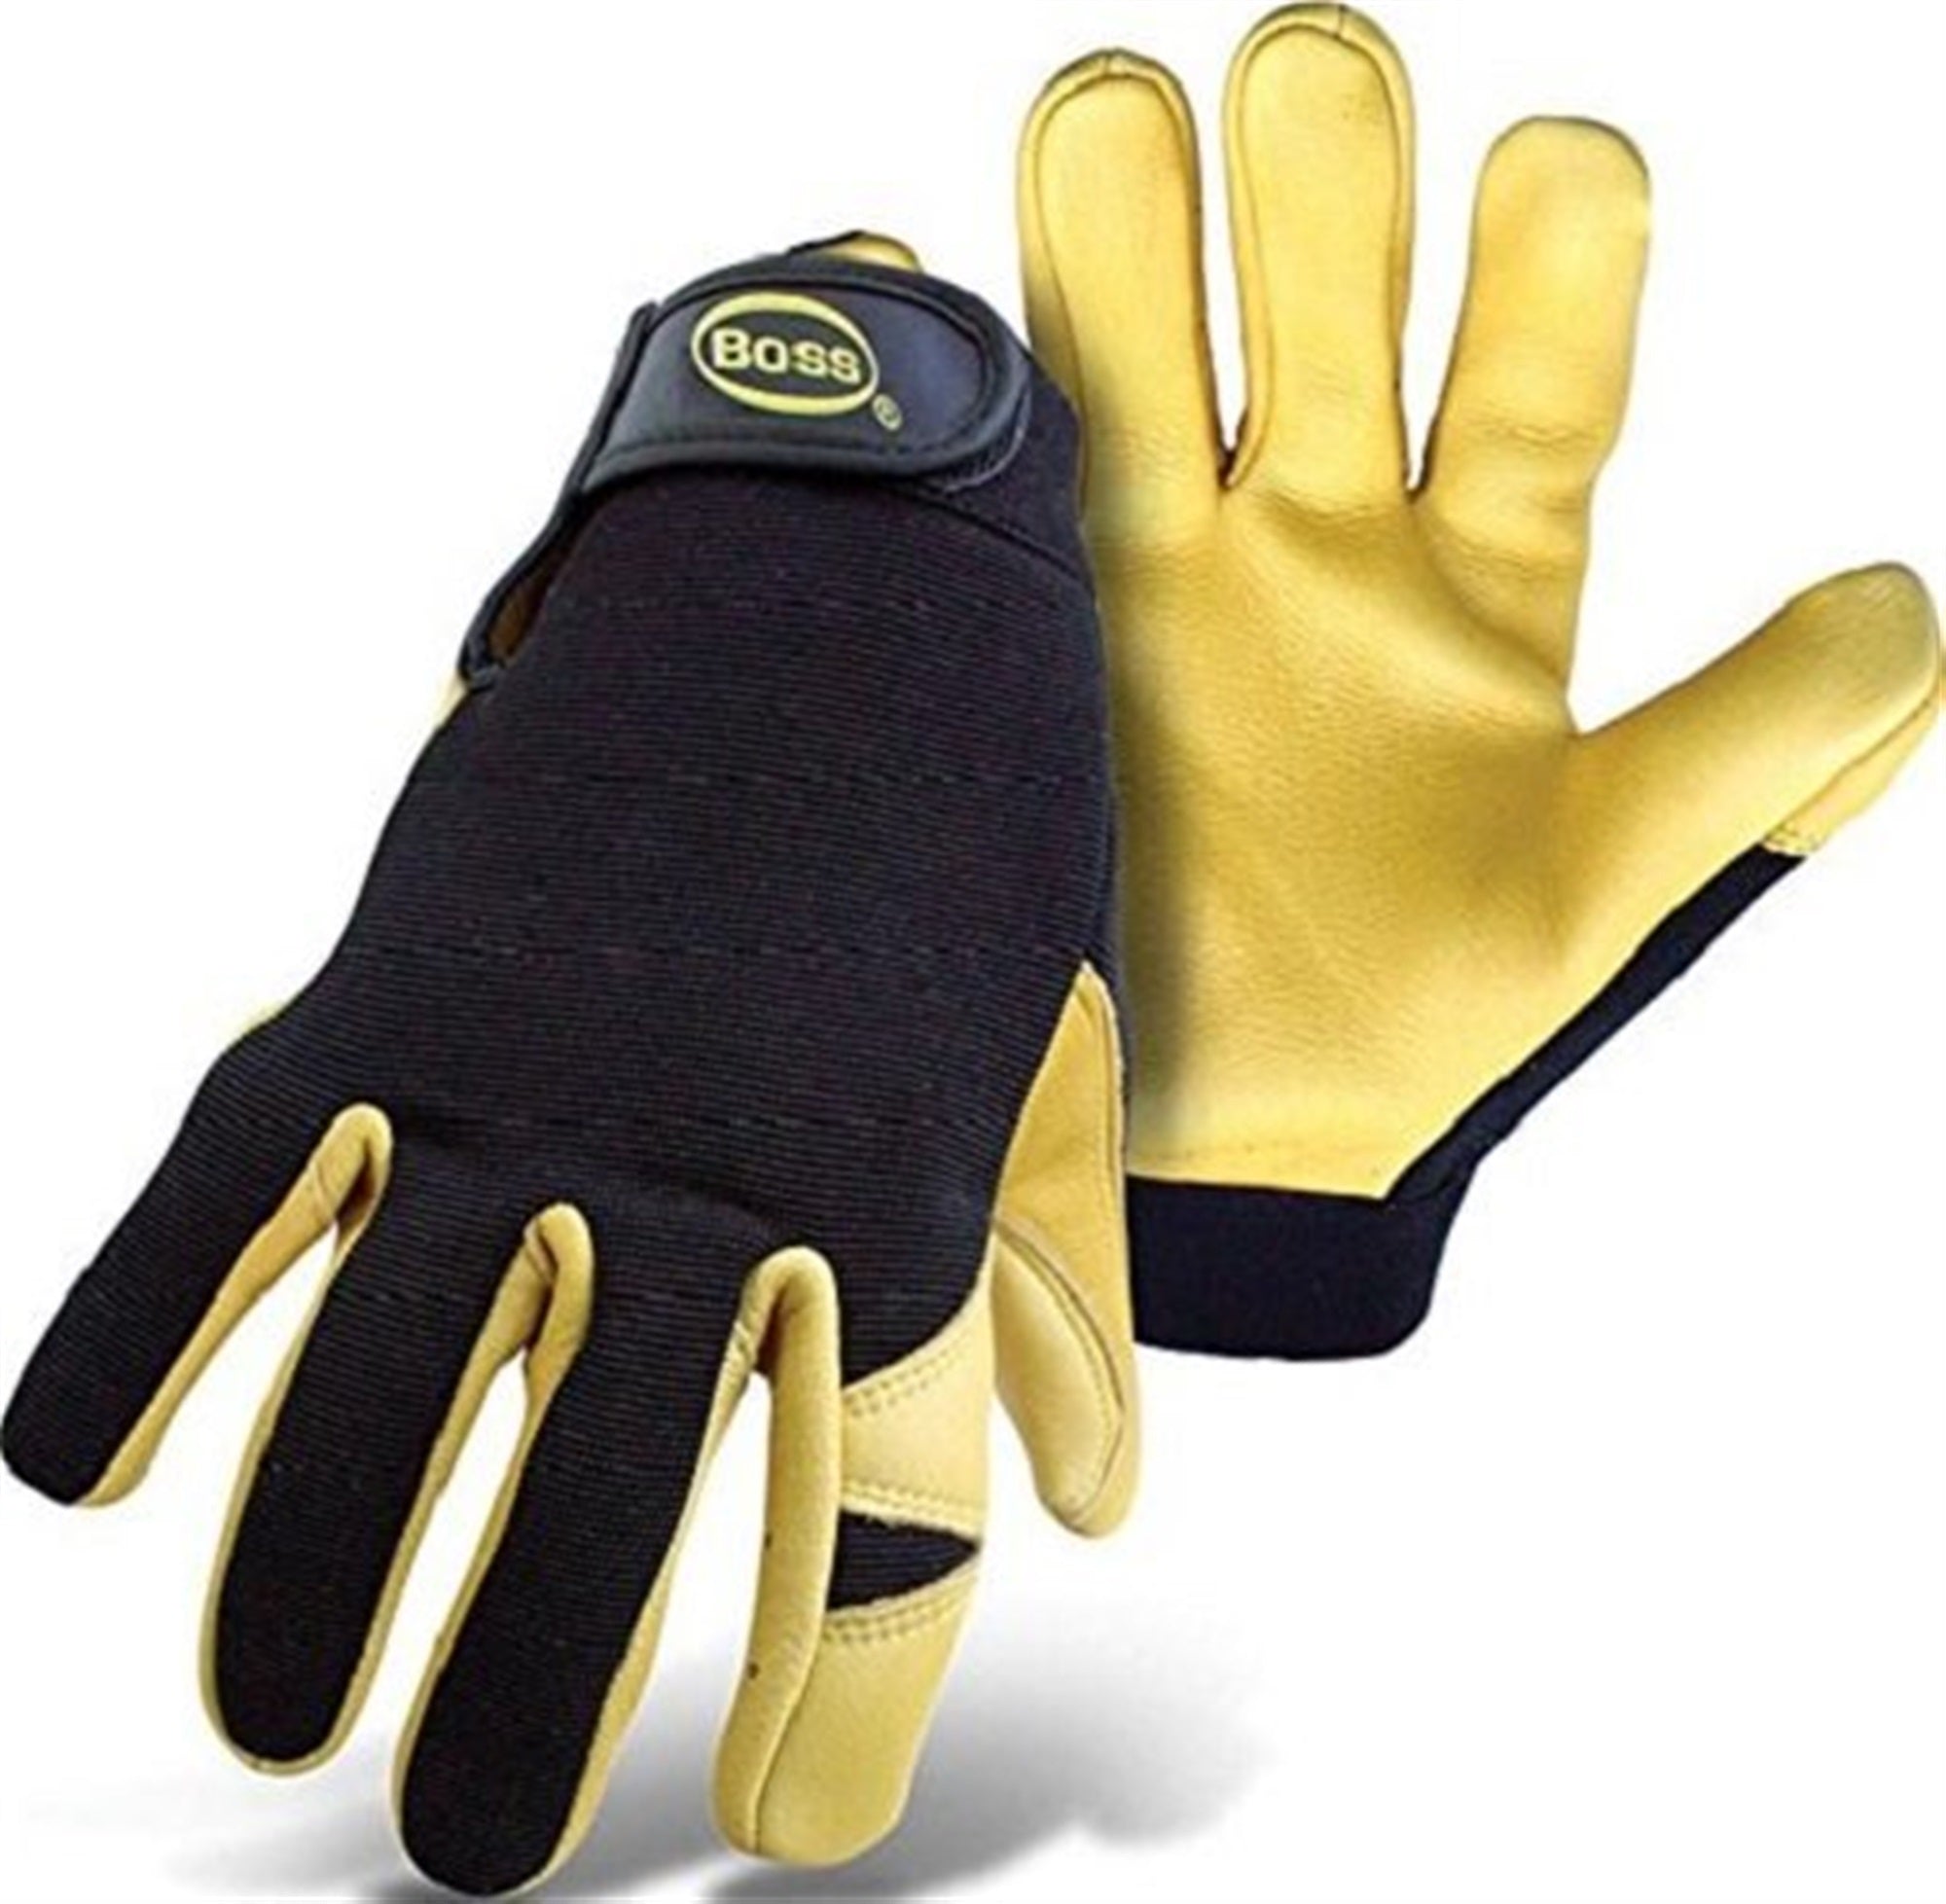 Boss Deerskin Leather Gloves with Nylon/Spandex Back Gloves, Size X-Large